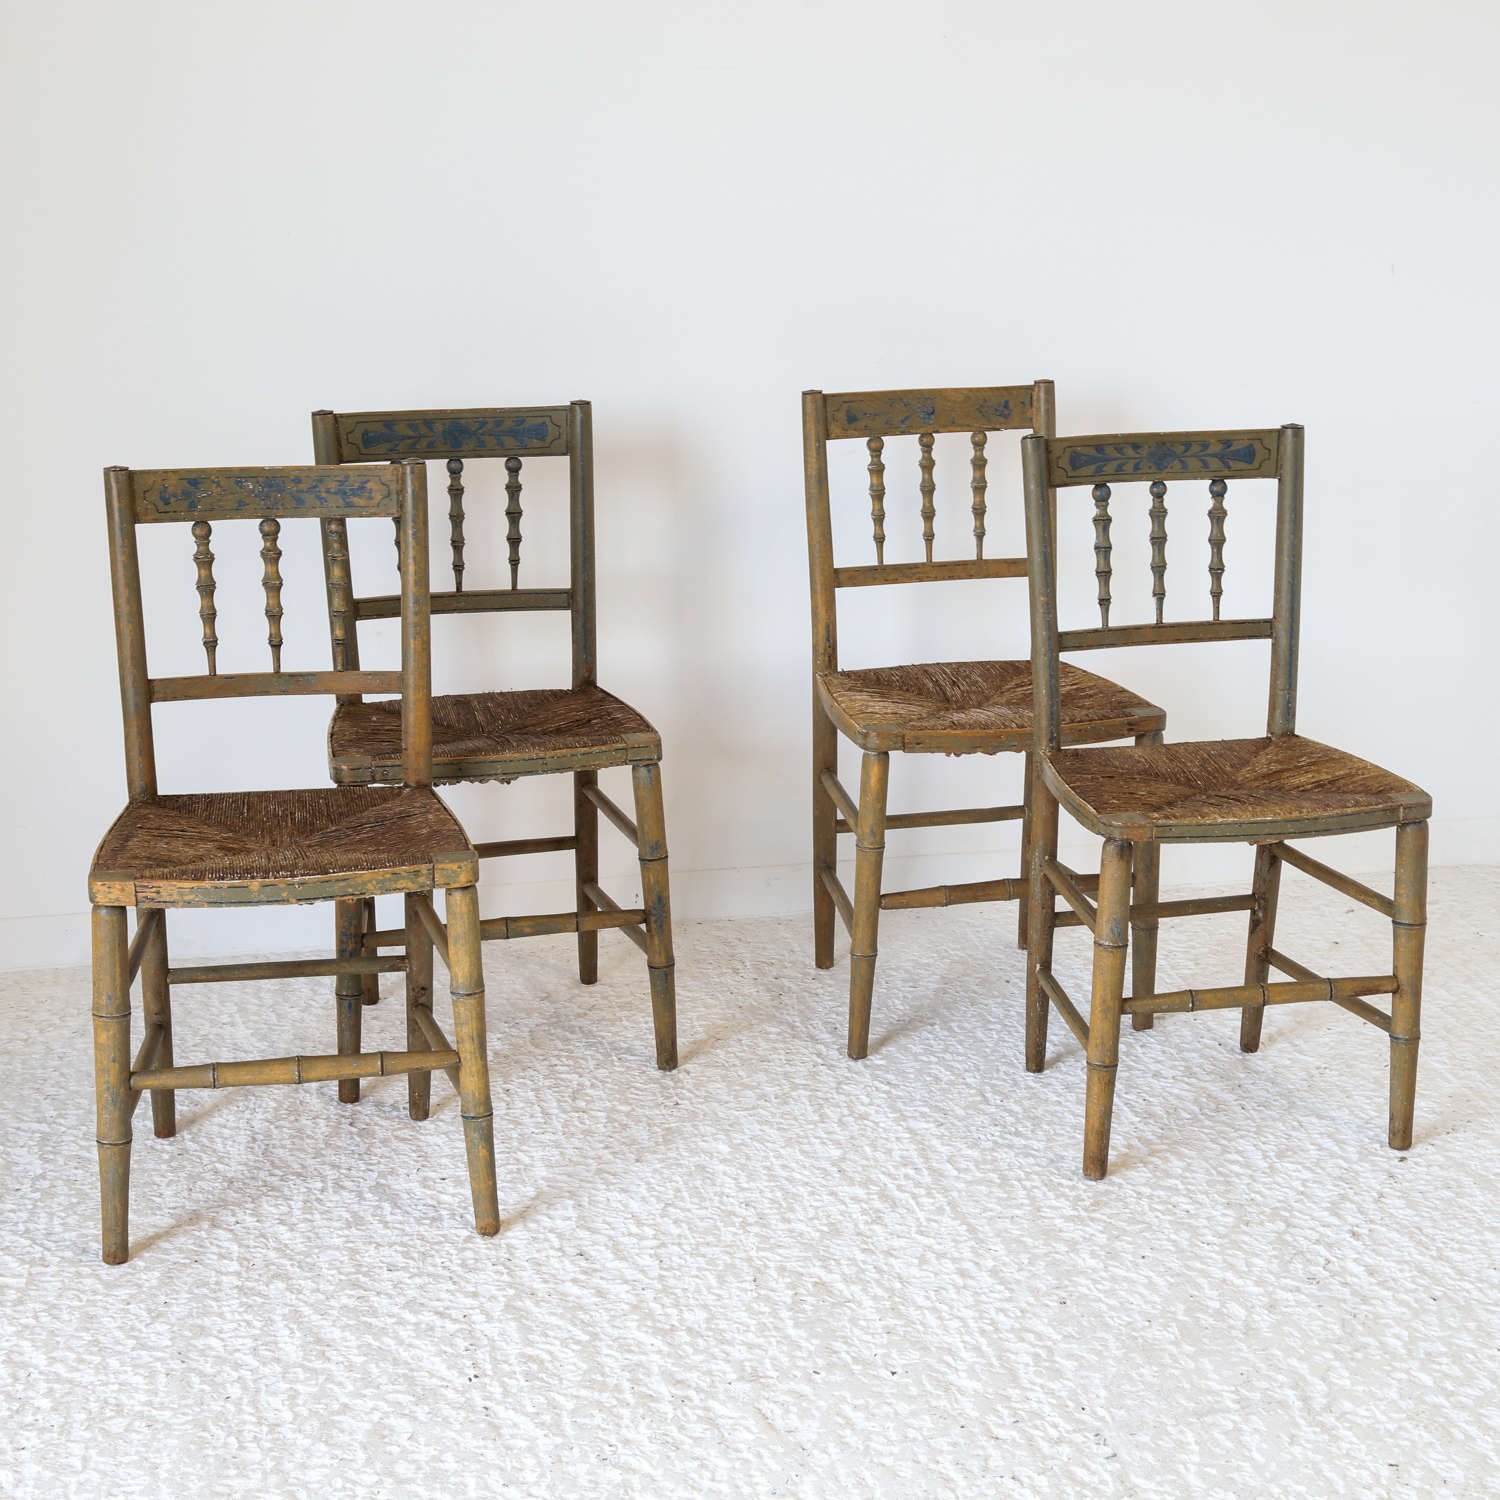 Circa 1820s Set Of 4 Painted Regency Faux Bamboo Chairs